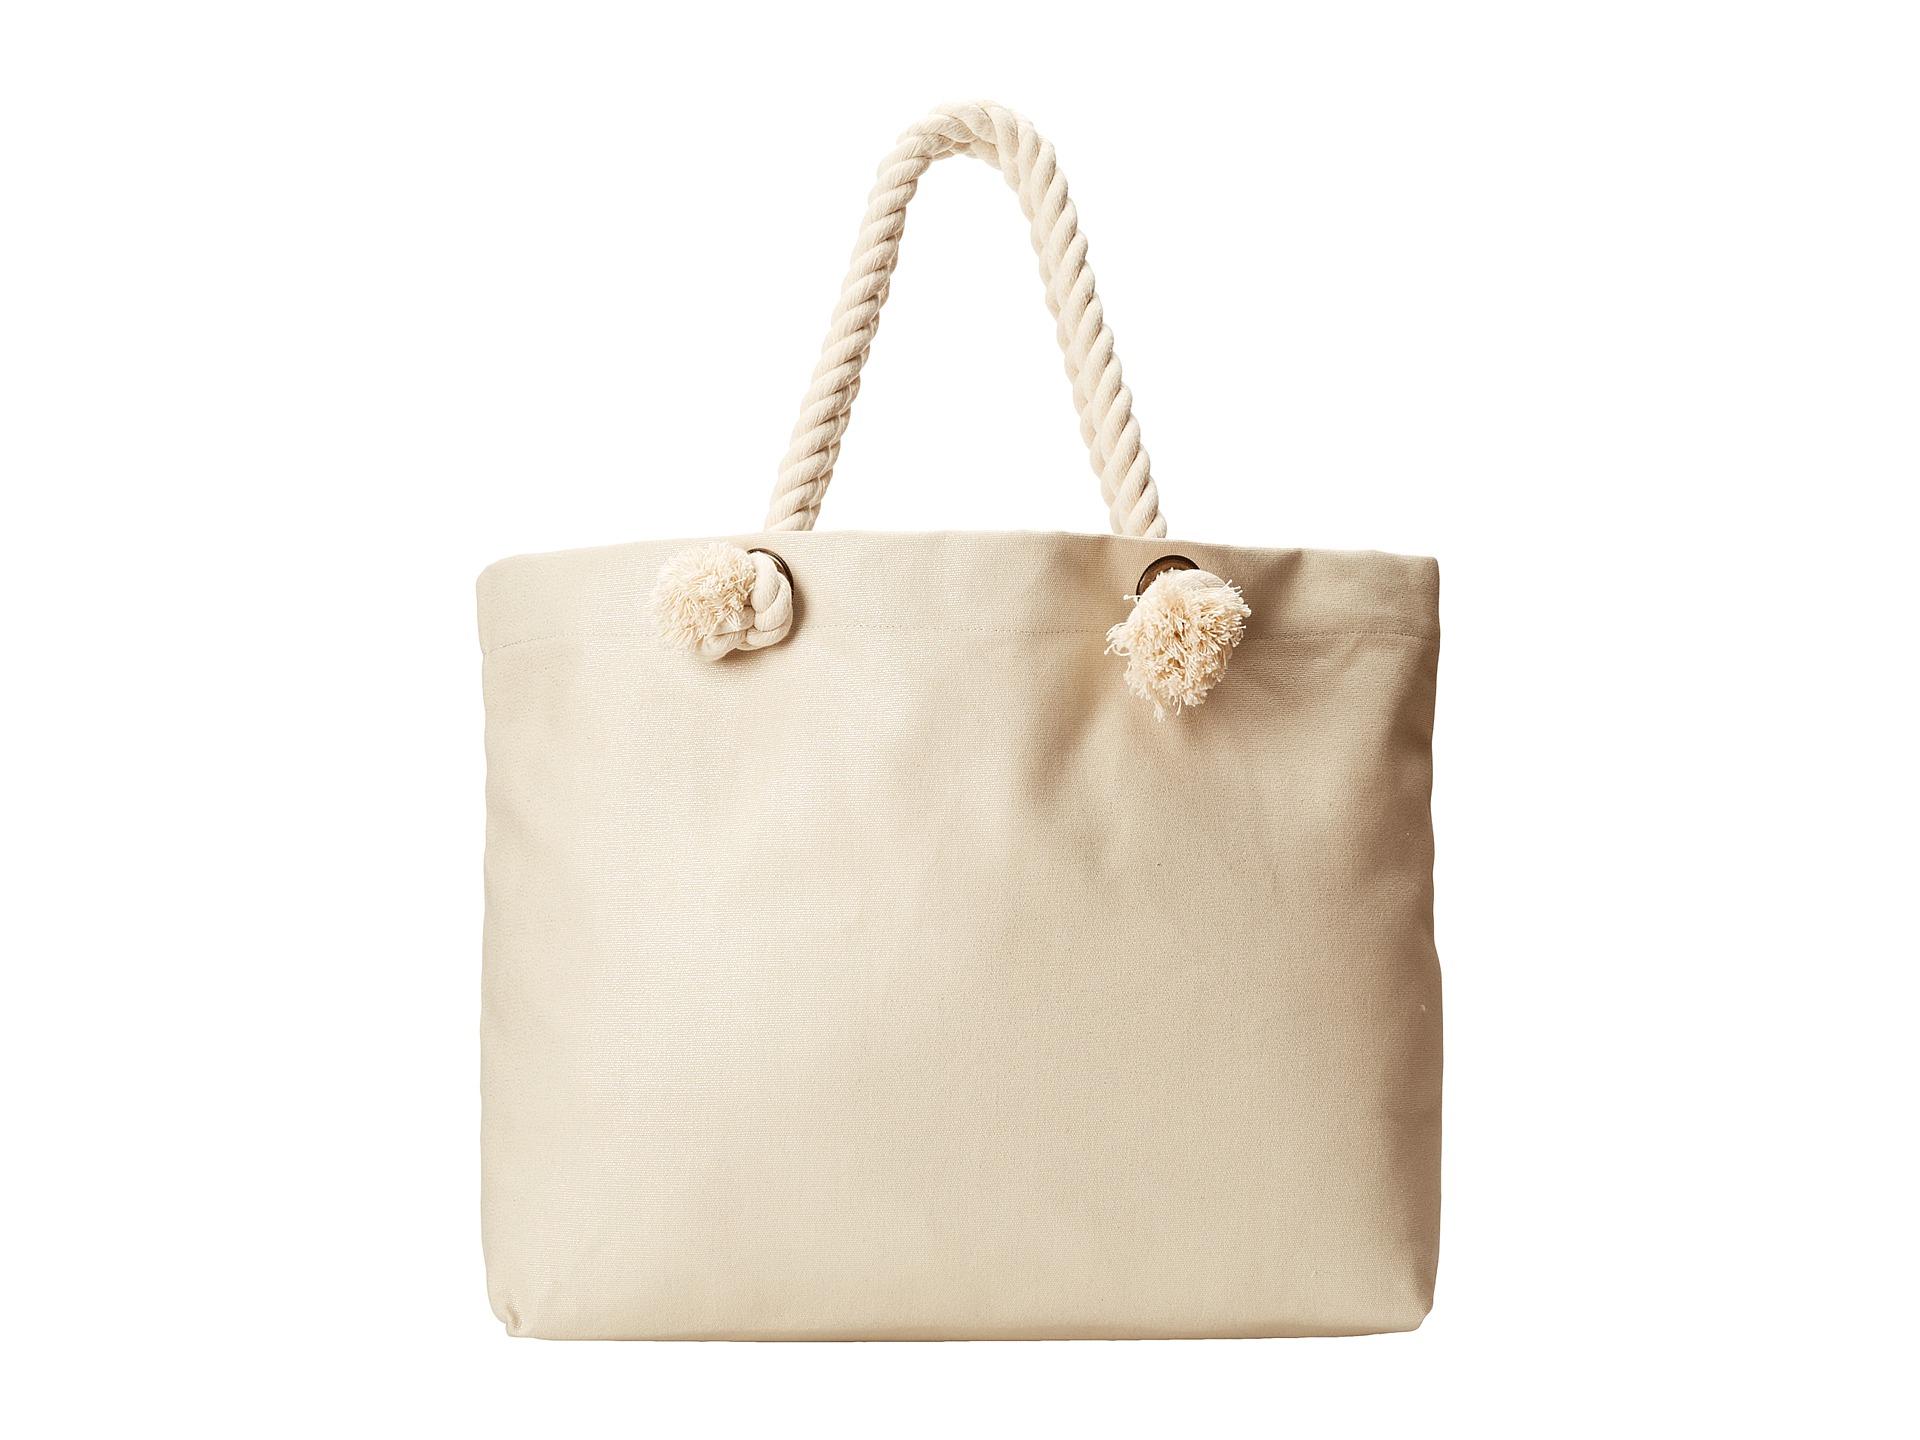 Hat Attack Perfect Canvas Beach Tote w/ Rope Handles - www.lvspeedy30.com Free Shipping BOTH Ways